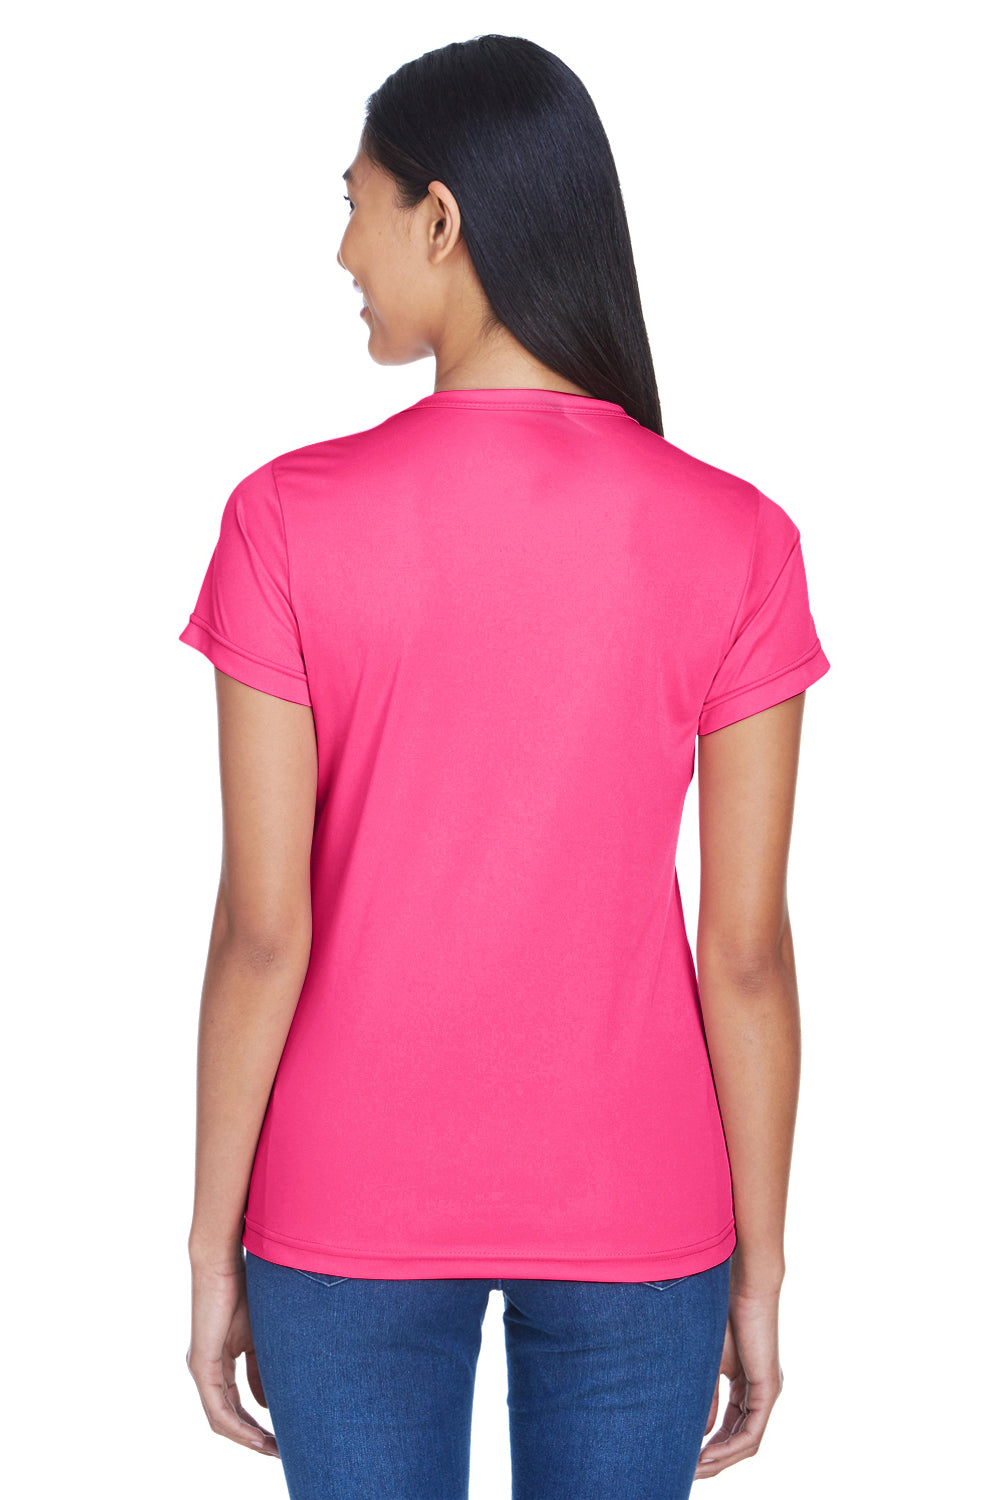 UltraClub 8420L Womens Cool & Dry Performance Moisture Wicking Short Sleeve Crewneck T-Shirt Heliconia Pink Back